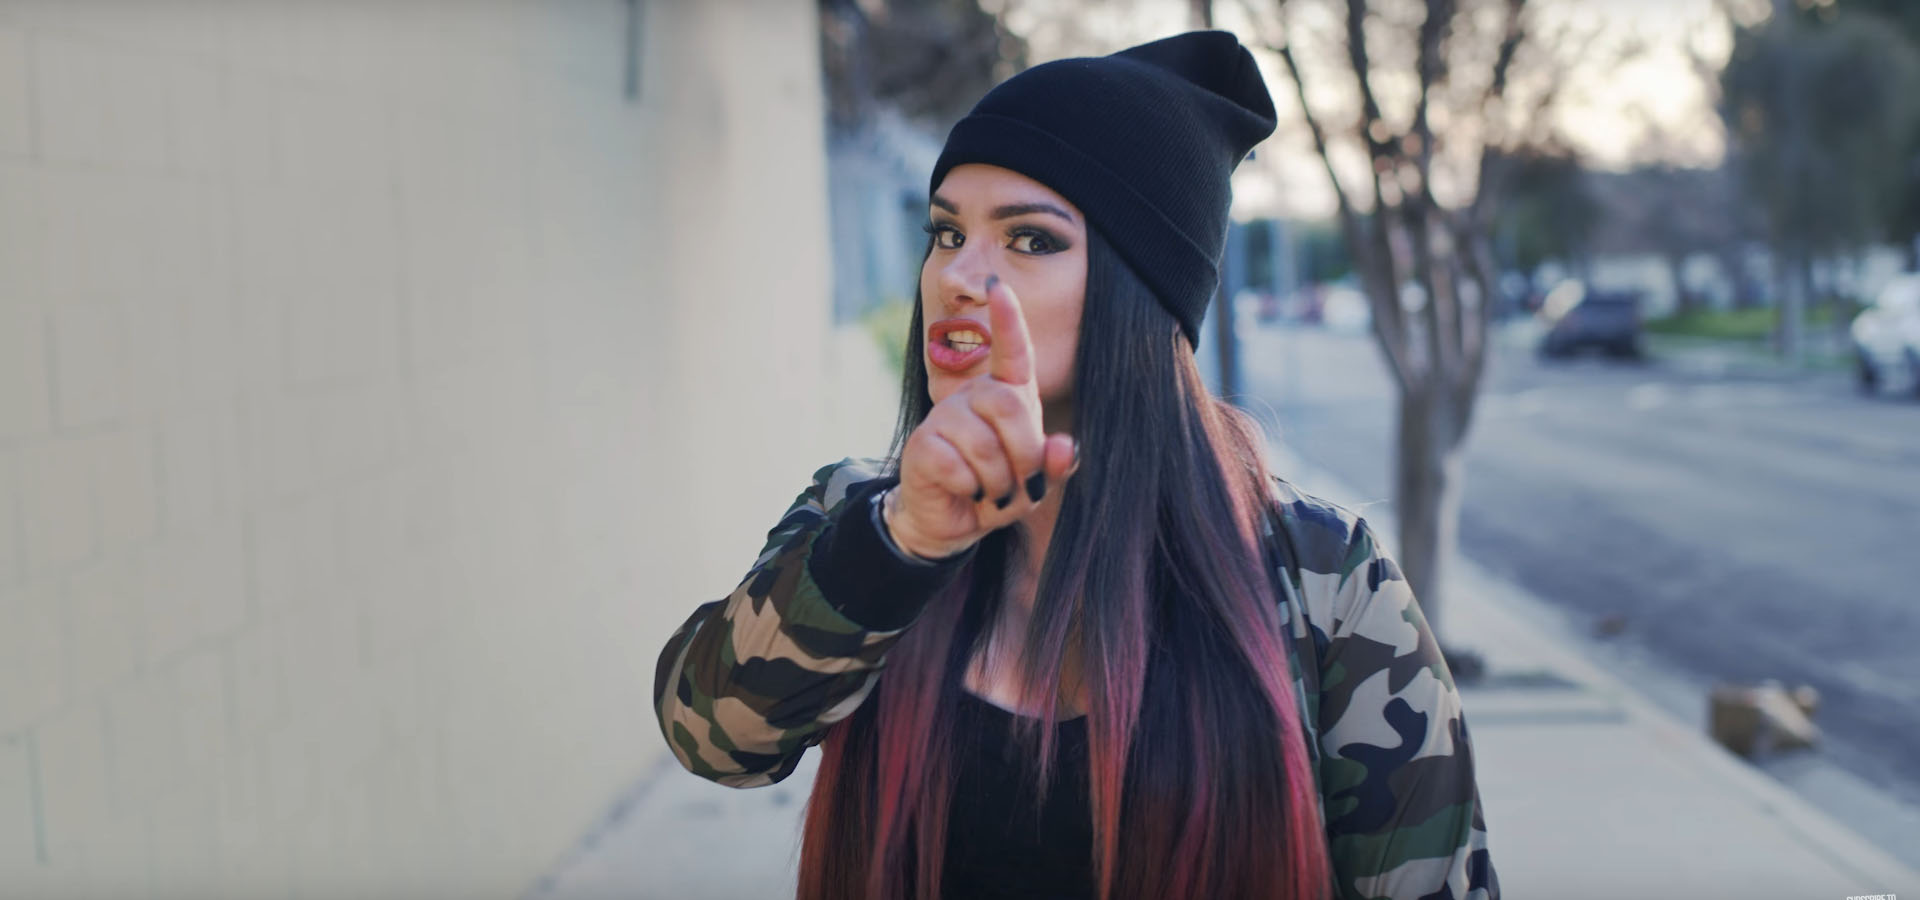 Snow Tha Product - I Dont Wanna Leave - rob.nu.